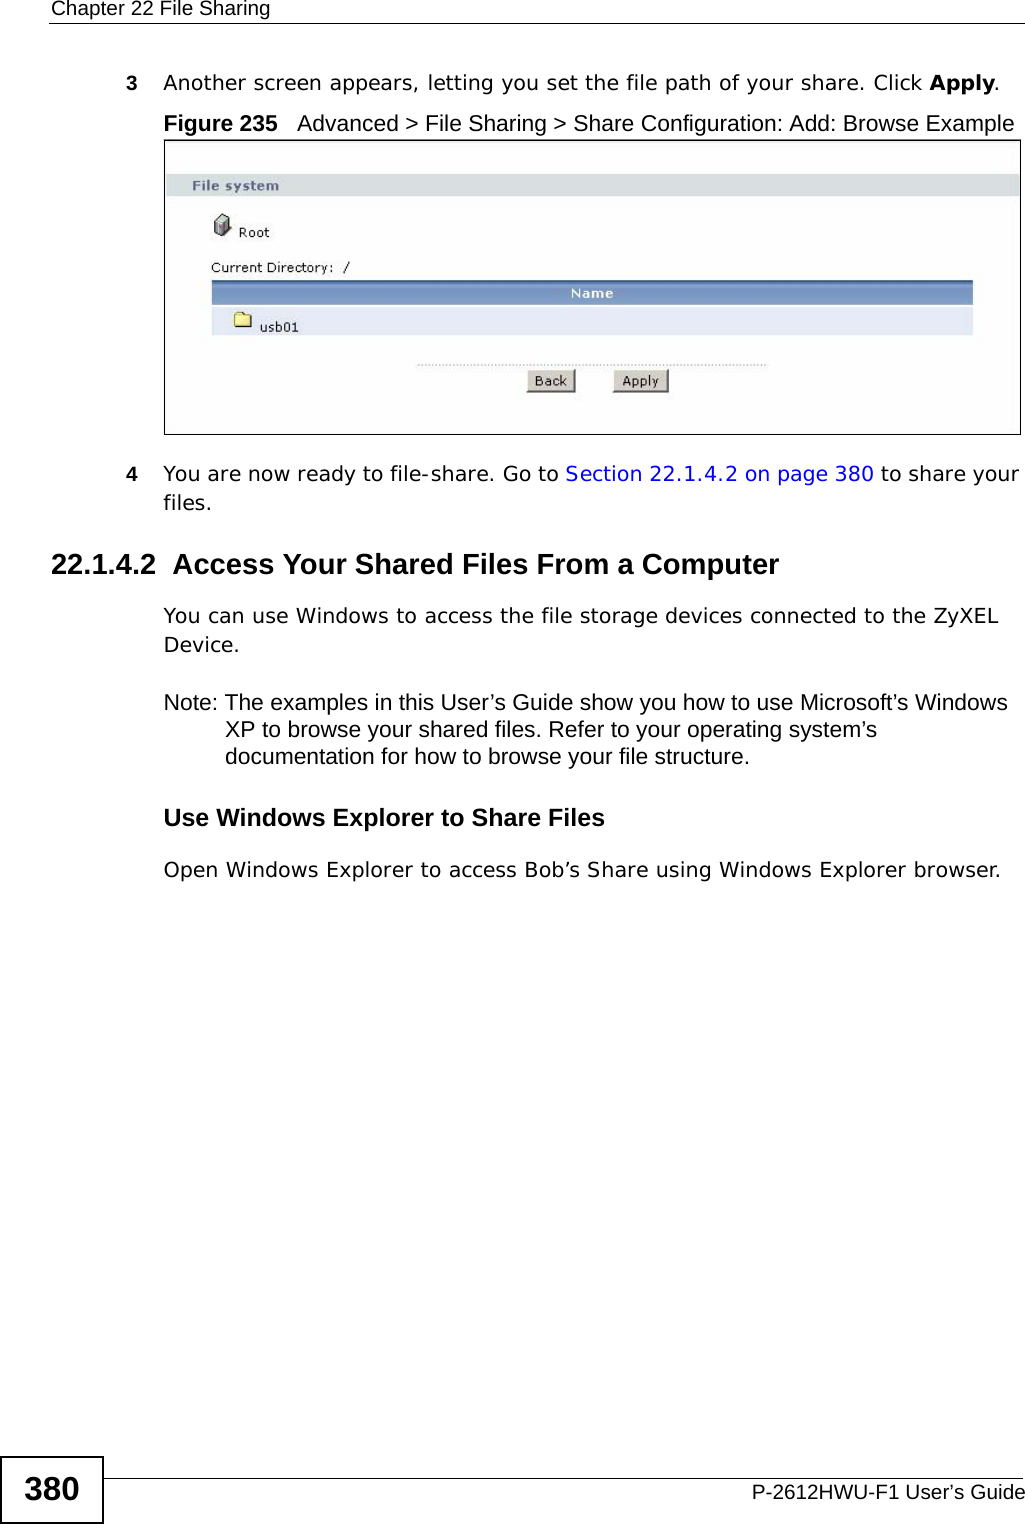 Chapter 22 File SharingP-2612HWU-F1 User’s Guide3803Another screen appears, letting you set the file path of your share. Click Apply. Figure 235   Advanced &gt; File Sharing &gt; Share Configuration: Add: Browse Example 4You are now ready to file-share. Go to Section 22.1.4.2 on page 380 to share your files.22.1.4.2  Access Your Shared Files From a Computer You can use Windows to access the file storage devices connected to the ZyXEL Device.Note: The examples in this User’s Guide show you how to use Microsoft’s Windows XP to browse your shared files. Refer to your operating system’s documentation for how to browse your file structure. Use Windows Explorer to Share Files Open Windows Explorer to access Bob’s Share using Windows Explorer browser.